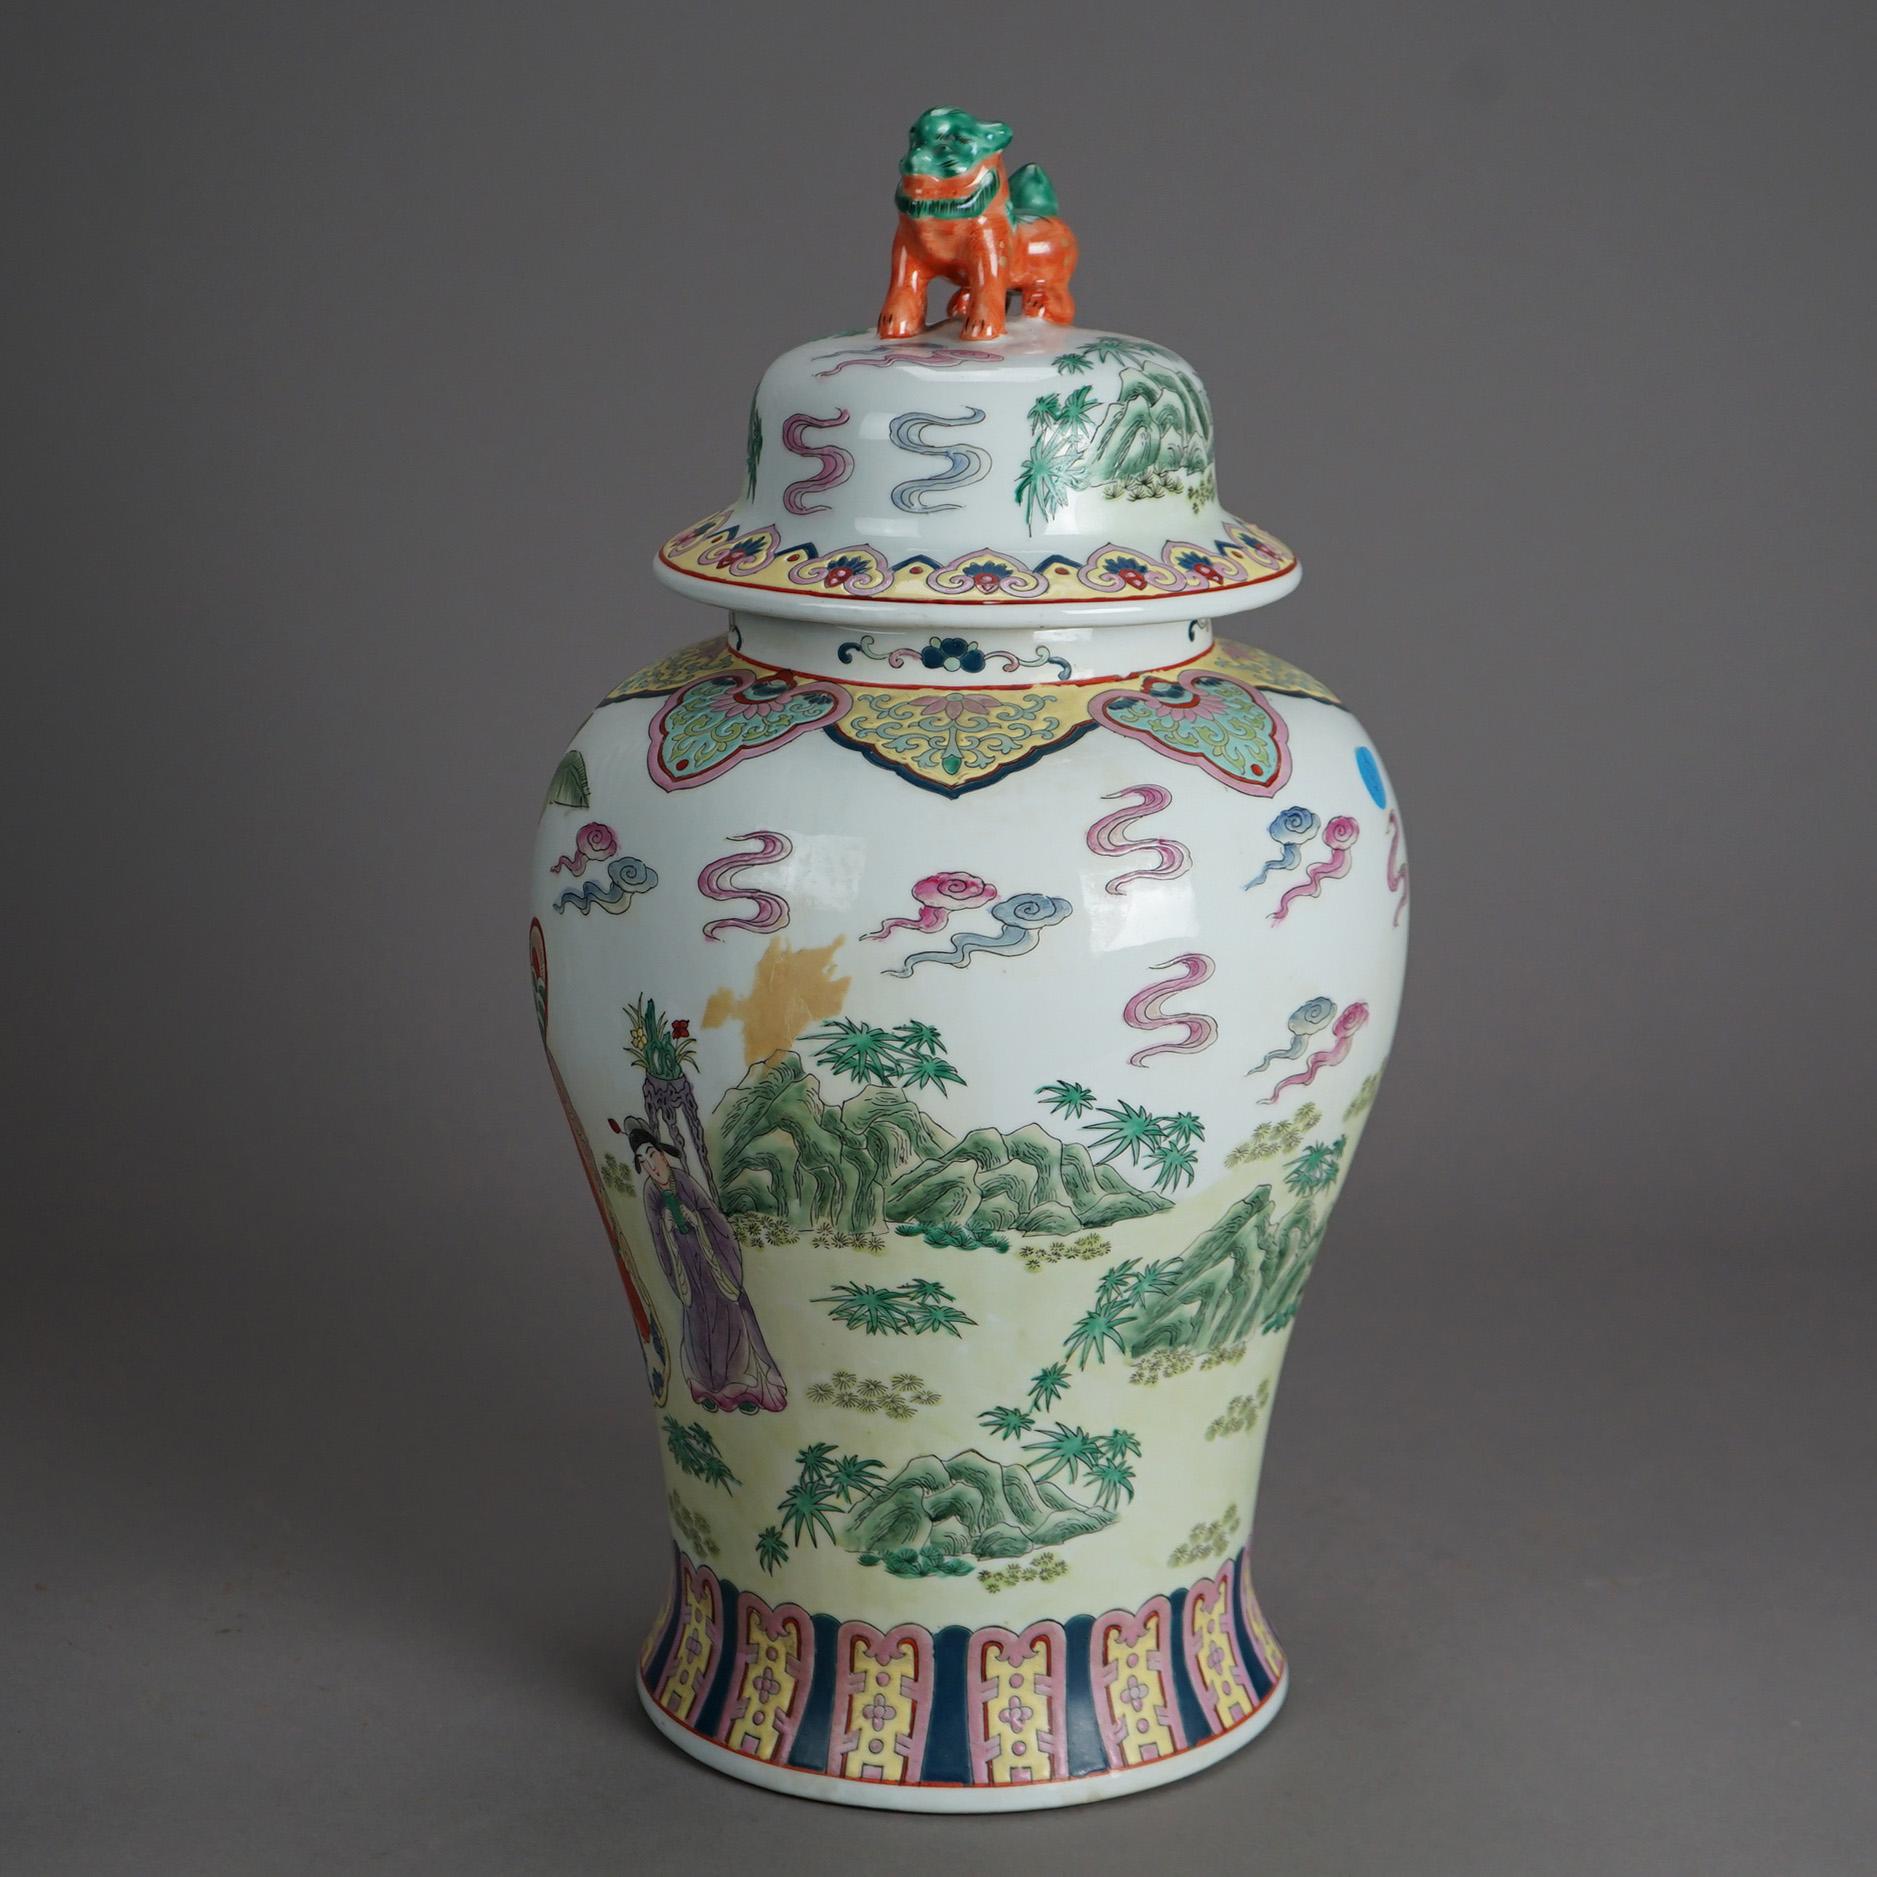 A large Chinese covered urn offers porcelain construction with figural foo dog finial over vessel with hand enameled genre scene and floral elements, stamped on base as photographed, 20th century

Measures- 18.5''H x 9.75''W x 9.75''D